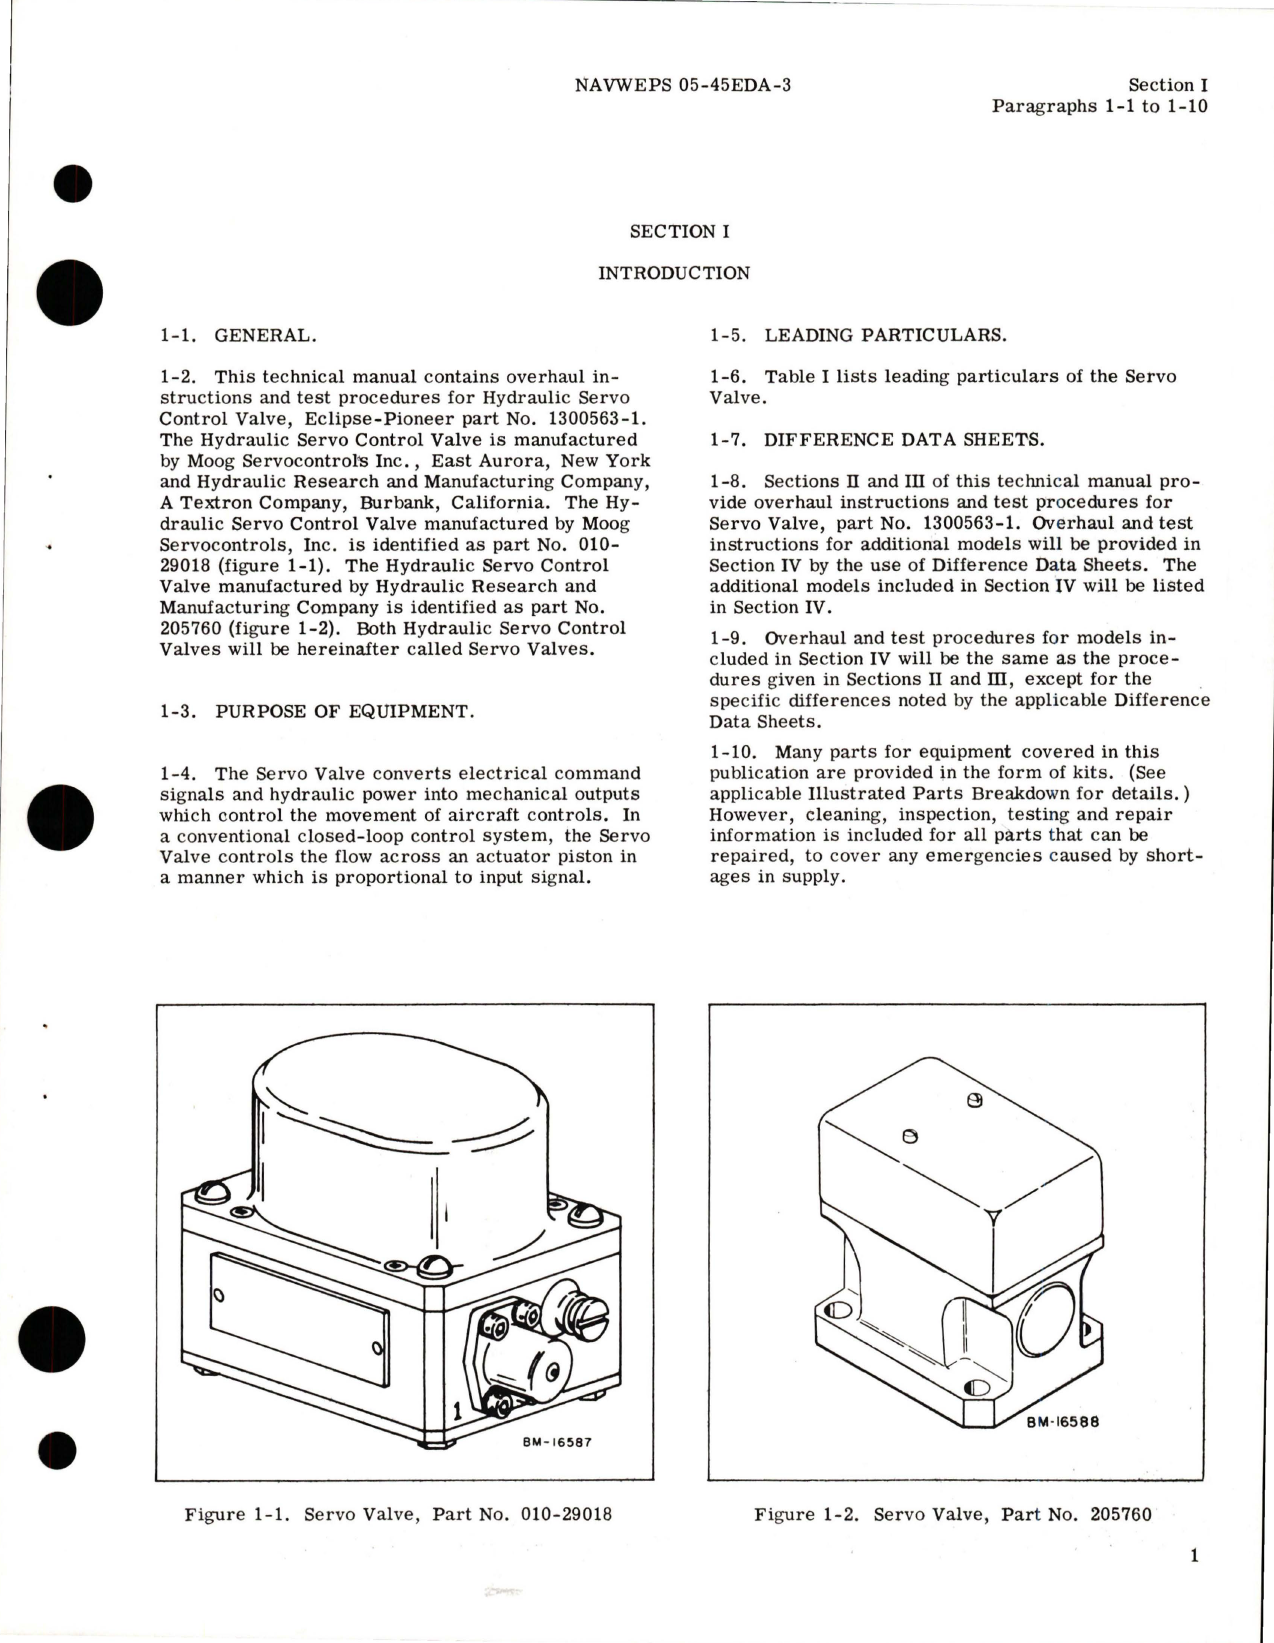 Sample page 5 from AirCorps Library document: Overhaul Instructions for Hydraulic Servo Control Valve - Part 1300563-1 